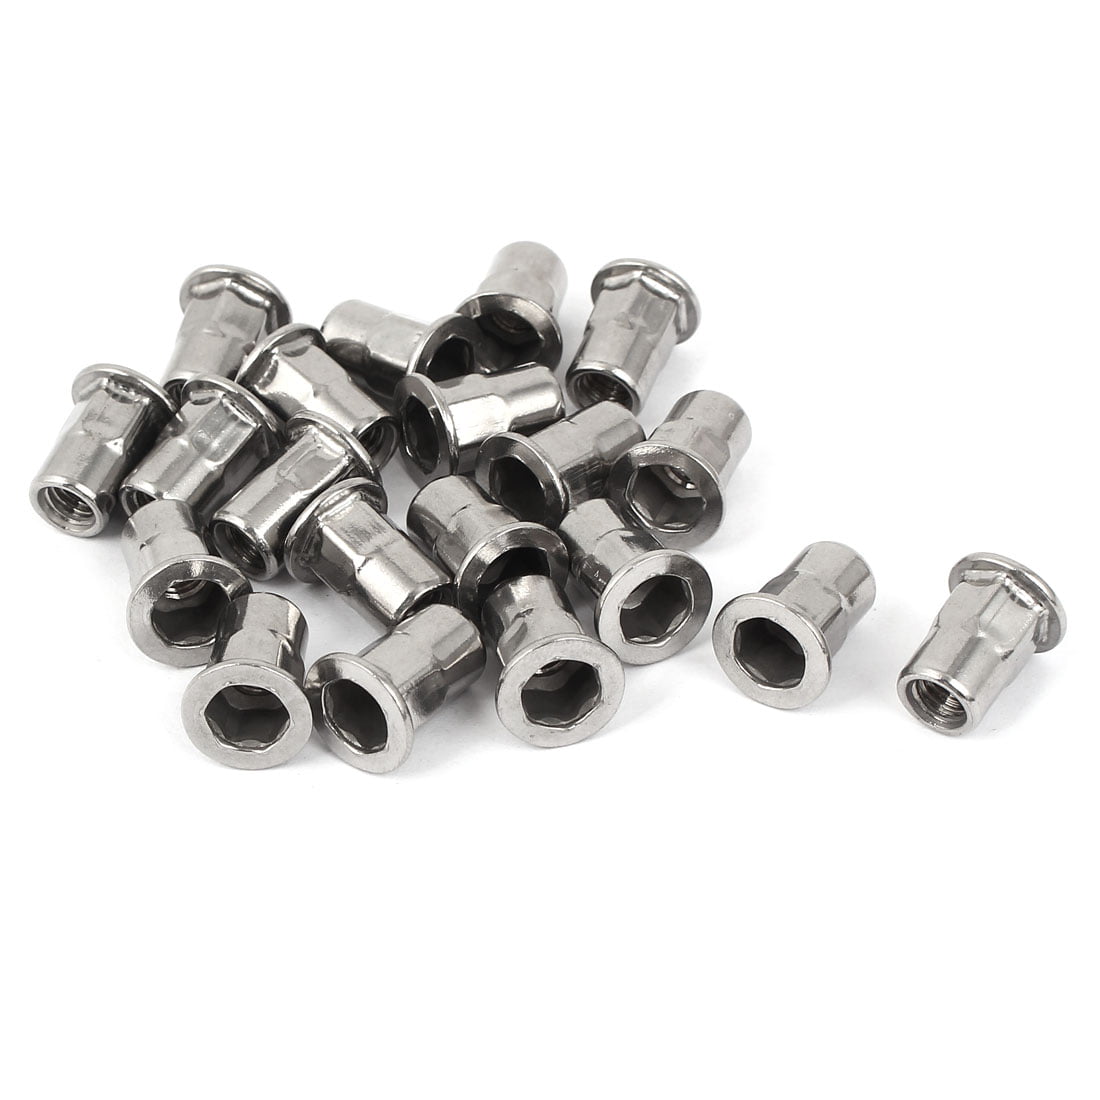 M6* mm Solid Rivets Flat Head Flush Mount Stainless Steel Countersunk Nuts 6-50 